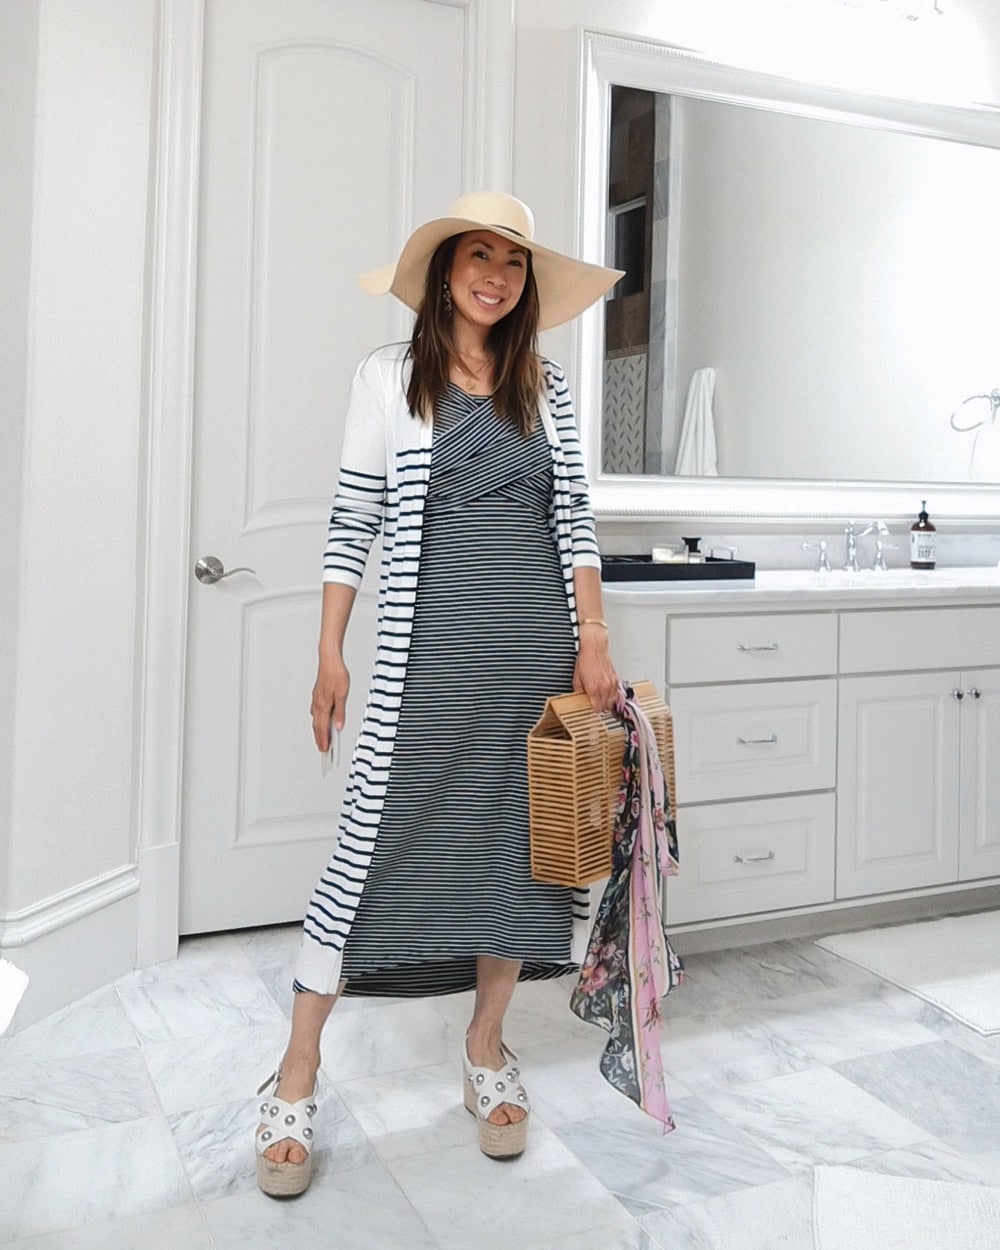 style of sam in cabi navy and white striped launch dress, cha cha earrings, long striped cardigan, flaunt floral scarf tied to bamboo bag, white espadrilles